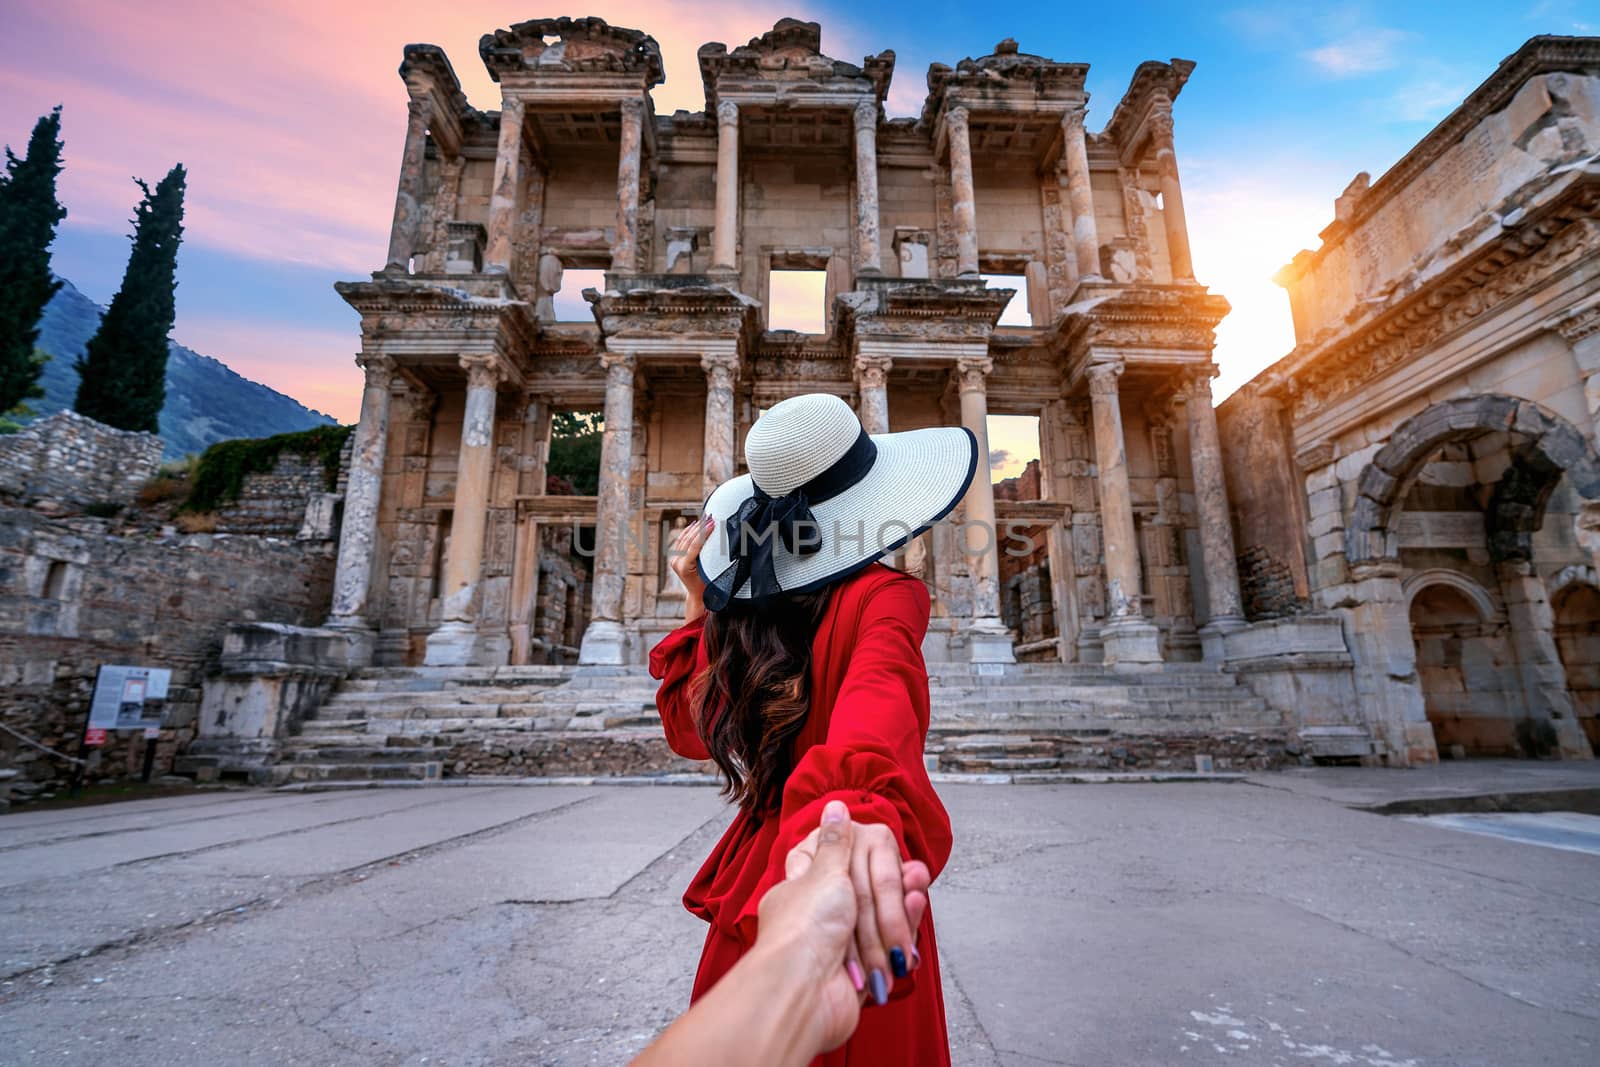 Women tourists holding man's hand and leading him to Celsus Library at Ephesus ancient city in Izmir, Turkey.